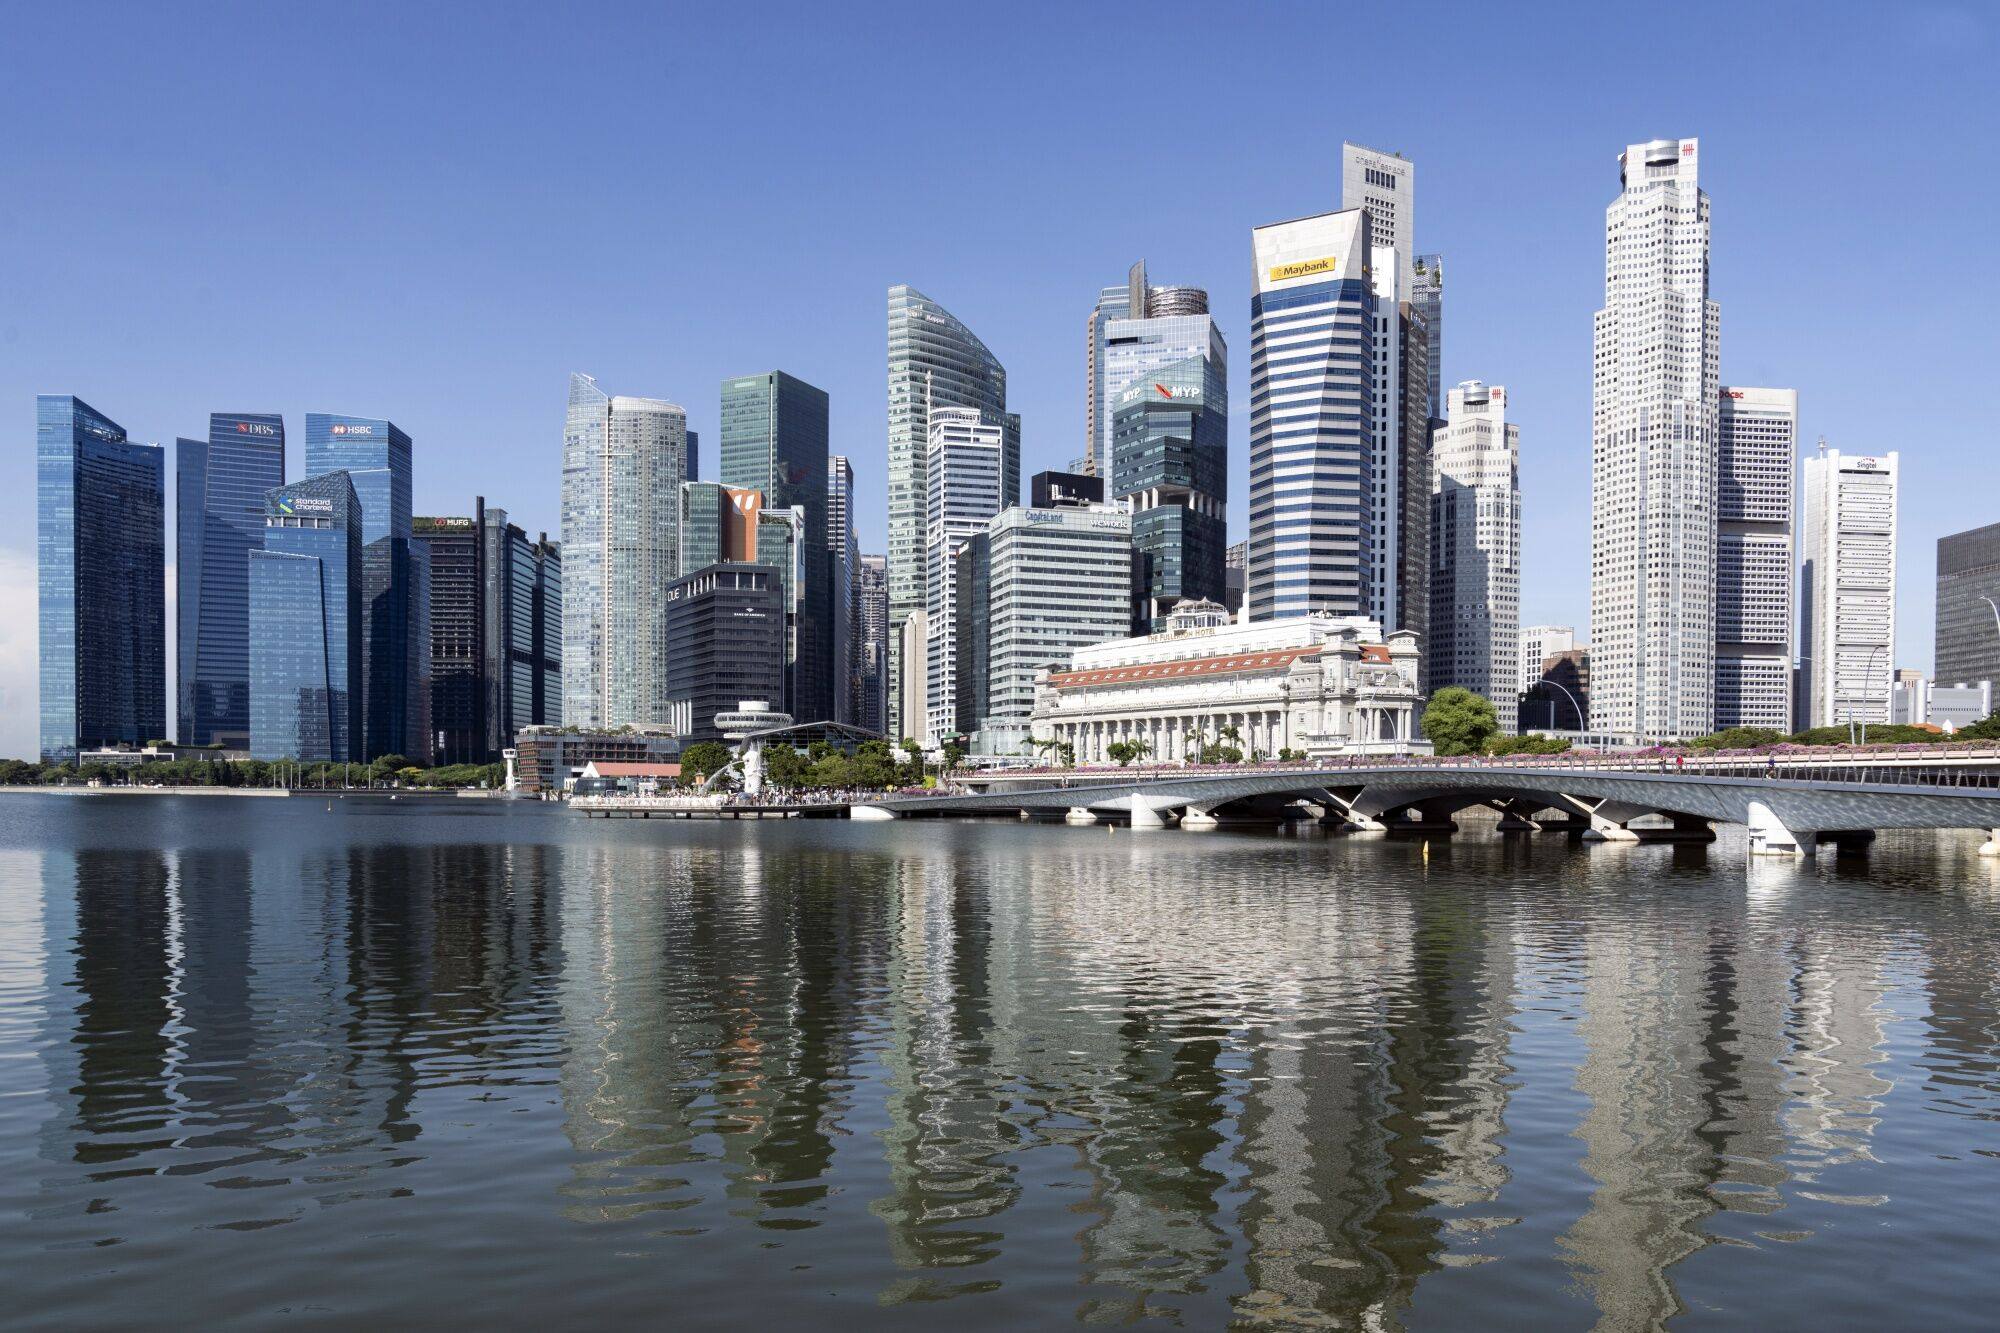 Singapore’s skyline. A man was jailed for sending sexually threatening emails to his ex-employer. Photo: Bloomberg